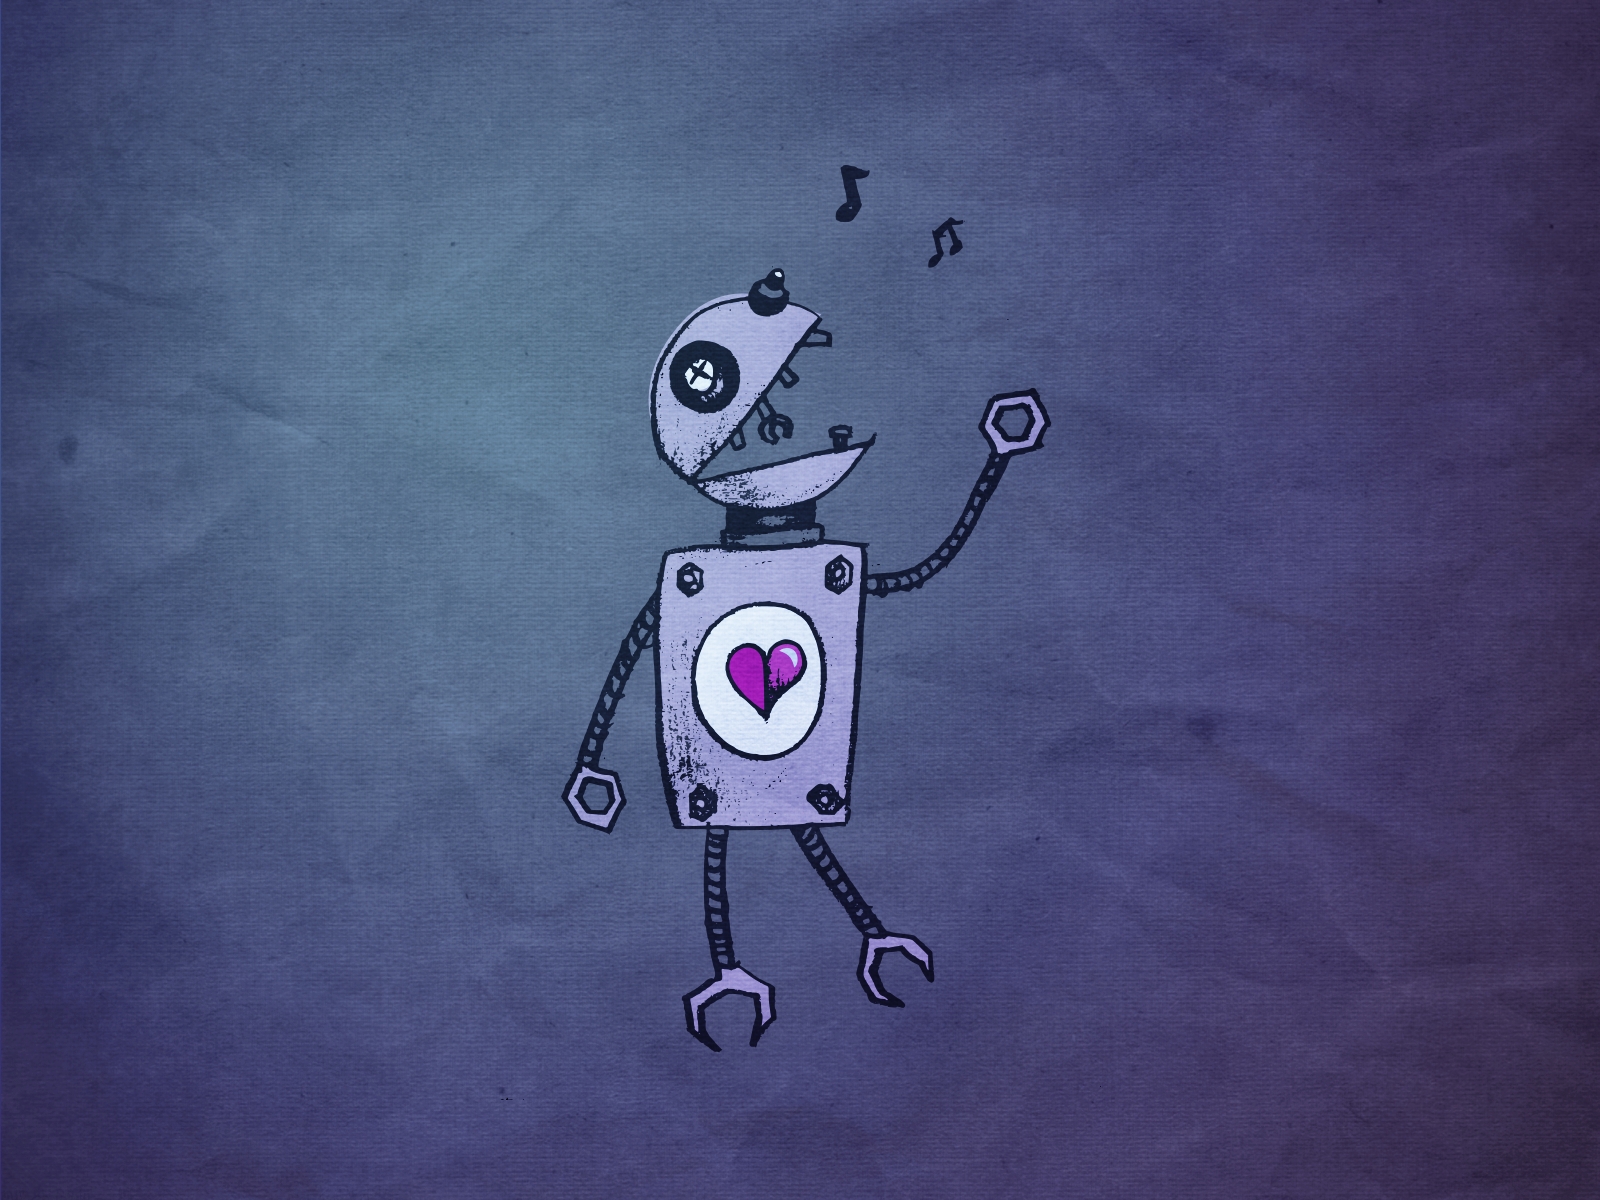 Robot Sings About The Happy Times When Robots Ruled Universe Click